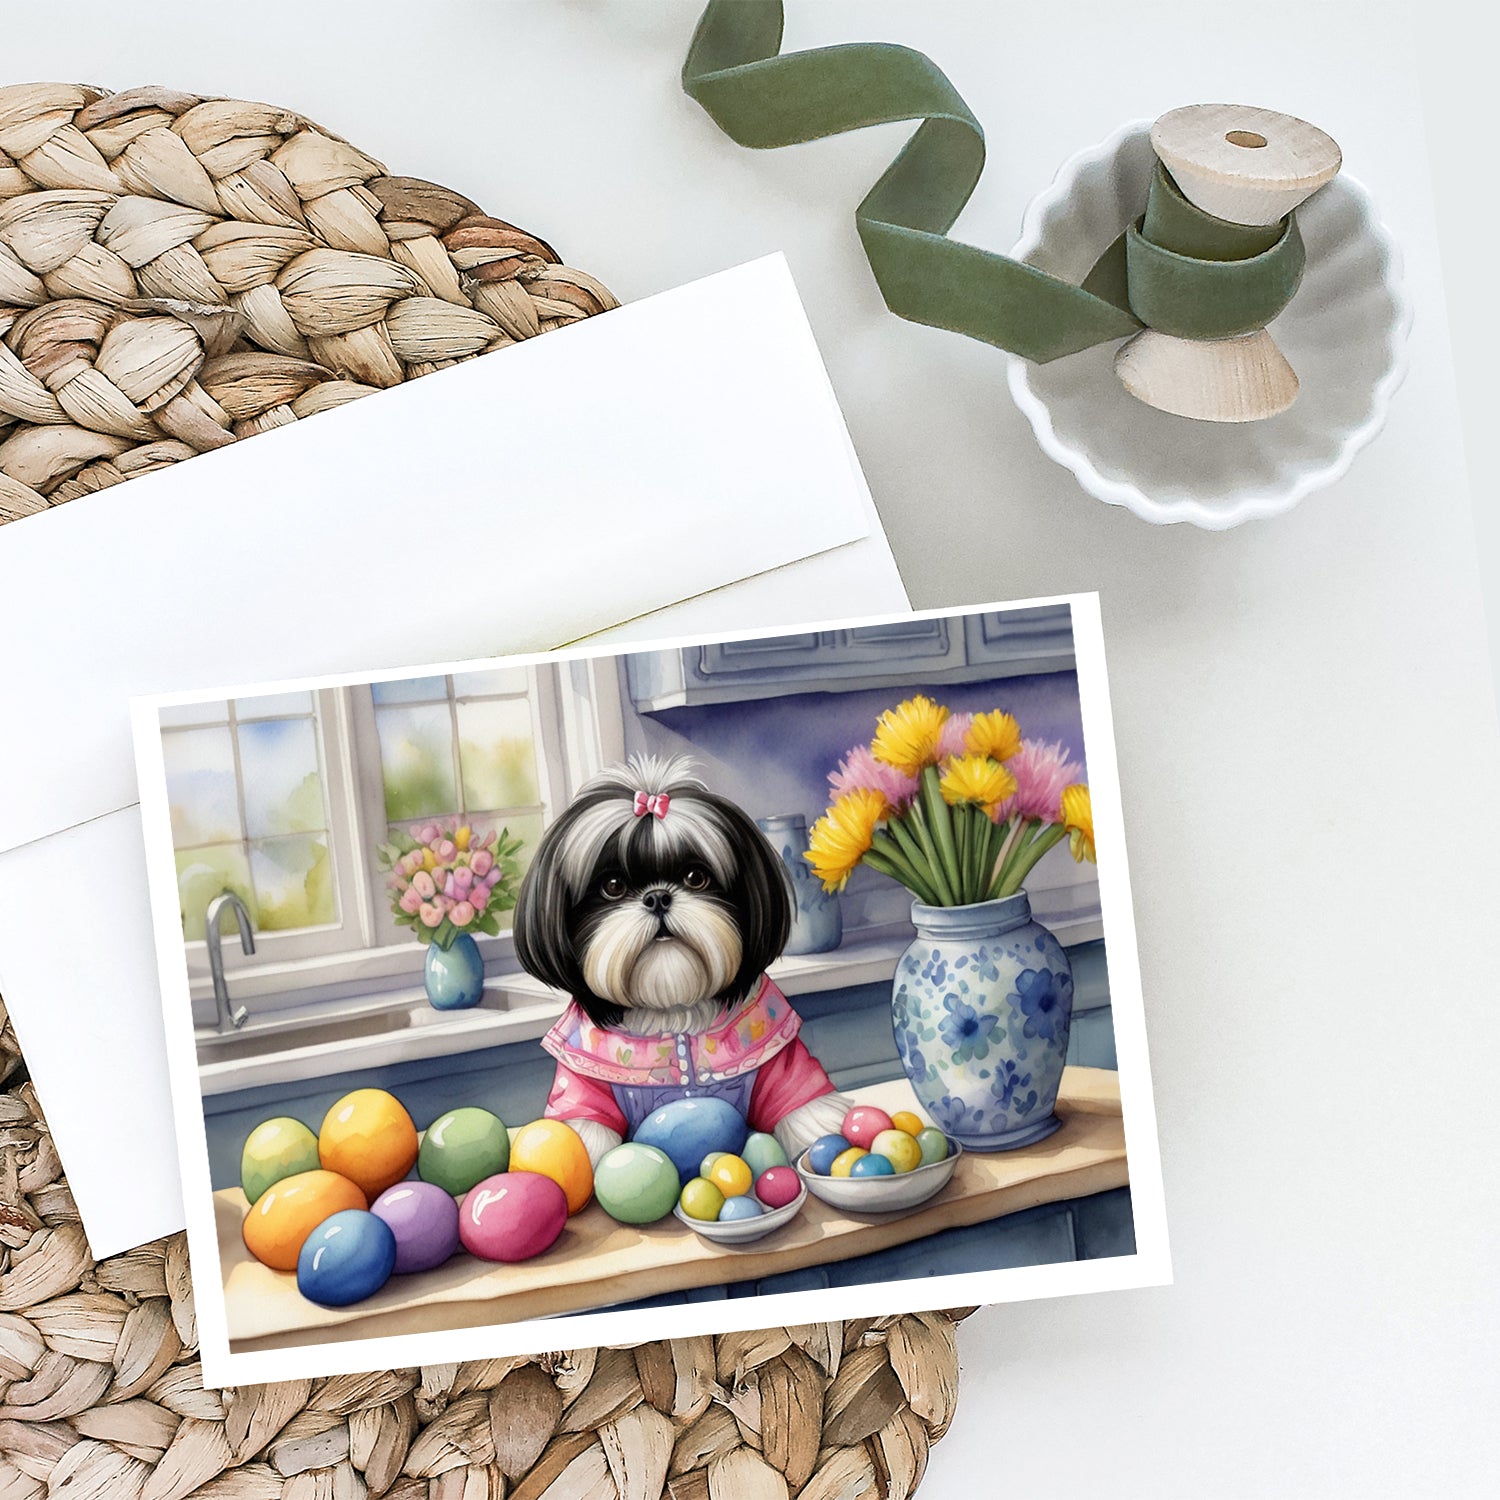 Buy this Decorating Easter Shih Tzu Greeting Cards Pack of 8